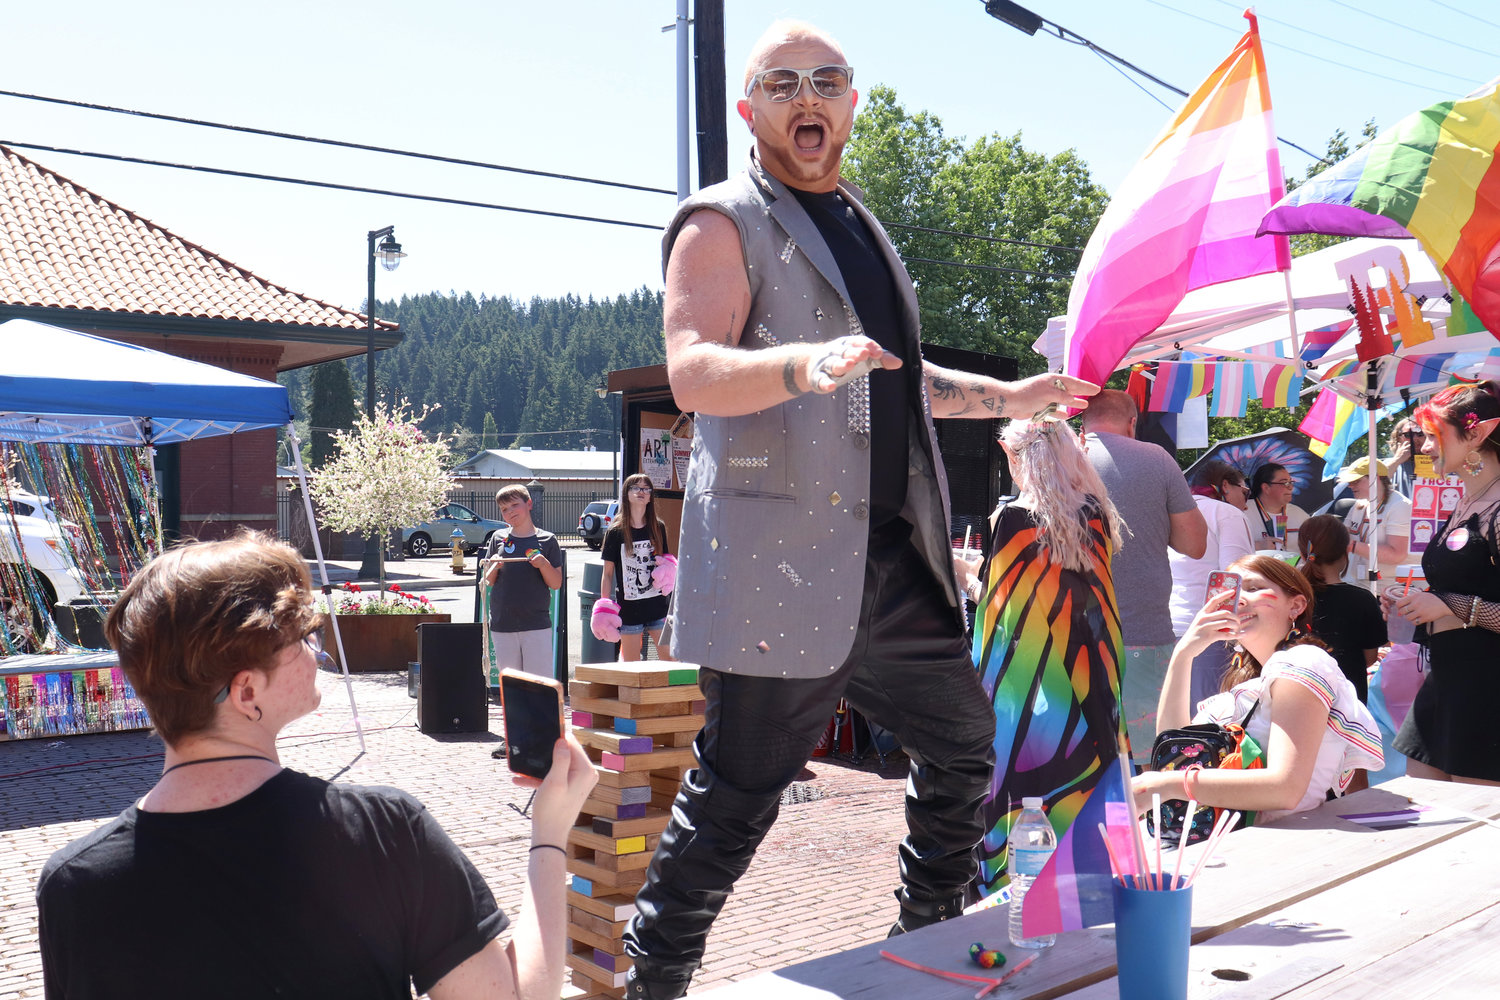 Freddy Prinze Charming jumps up on a table during a performance at Lewis County Pride in Centralia on Saturday.